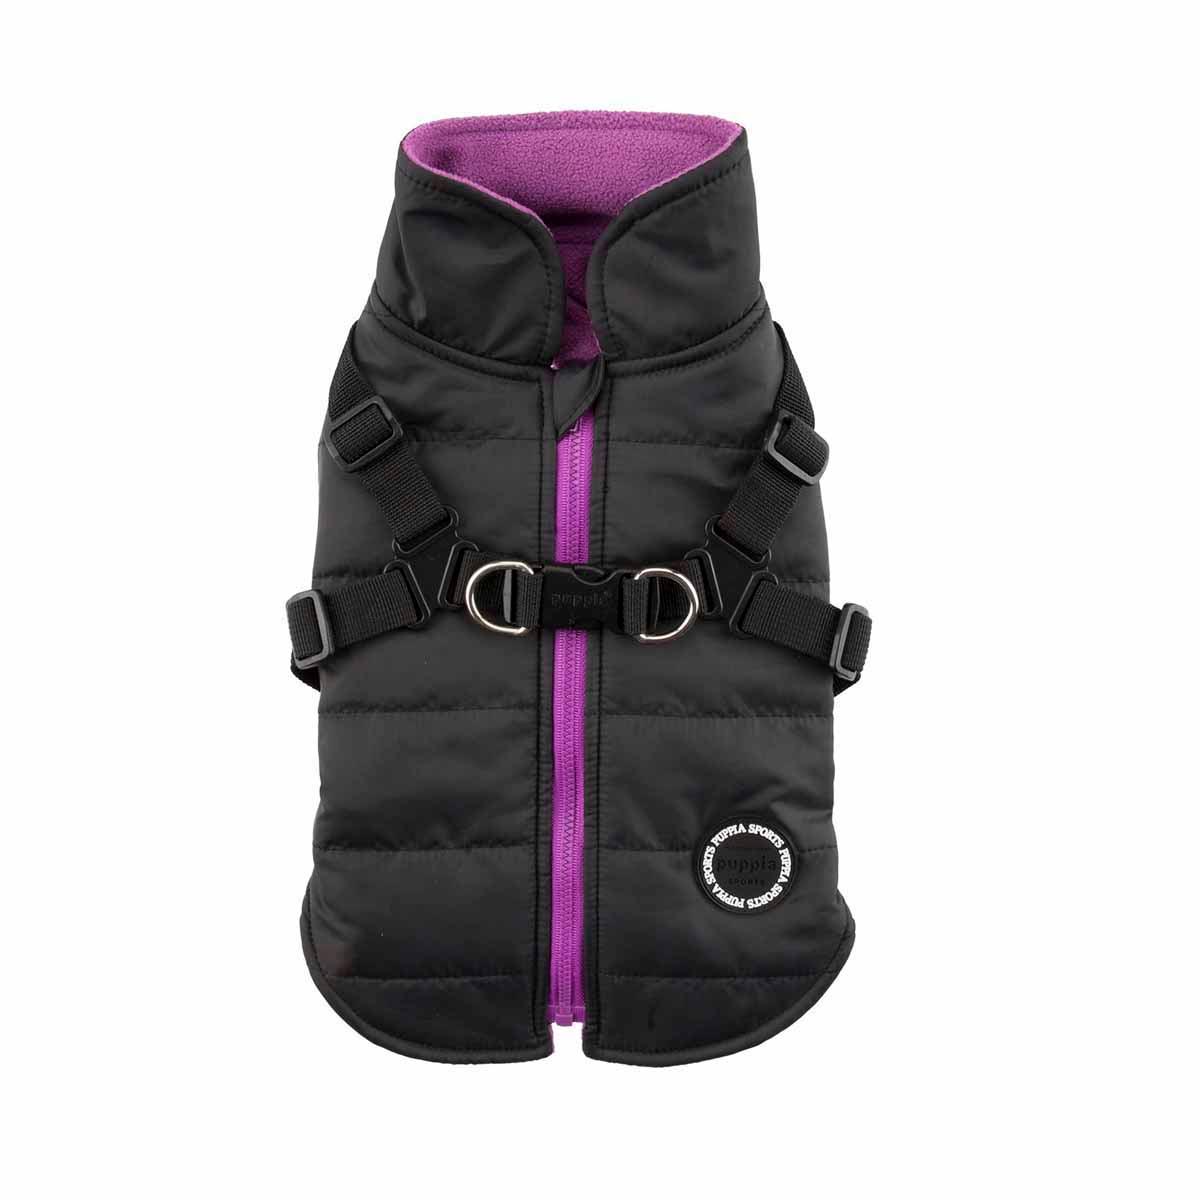 Mountaineer Harness Dog Coat by Puppia - Black